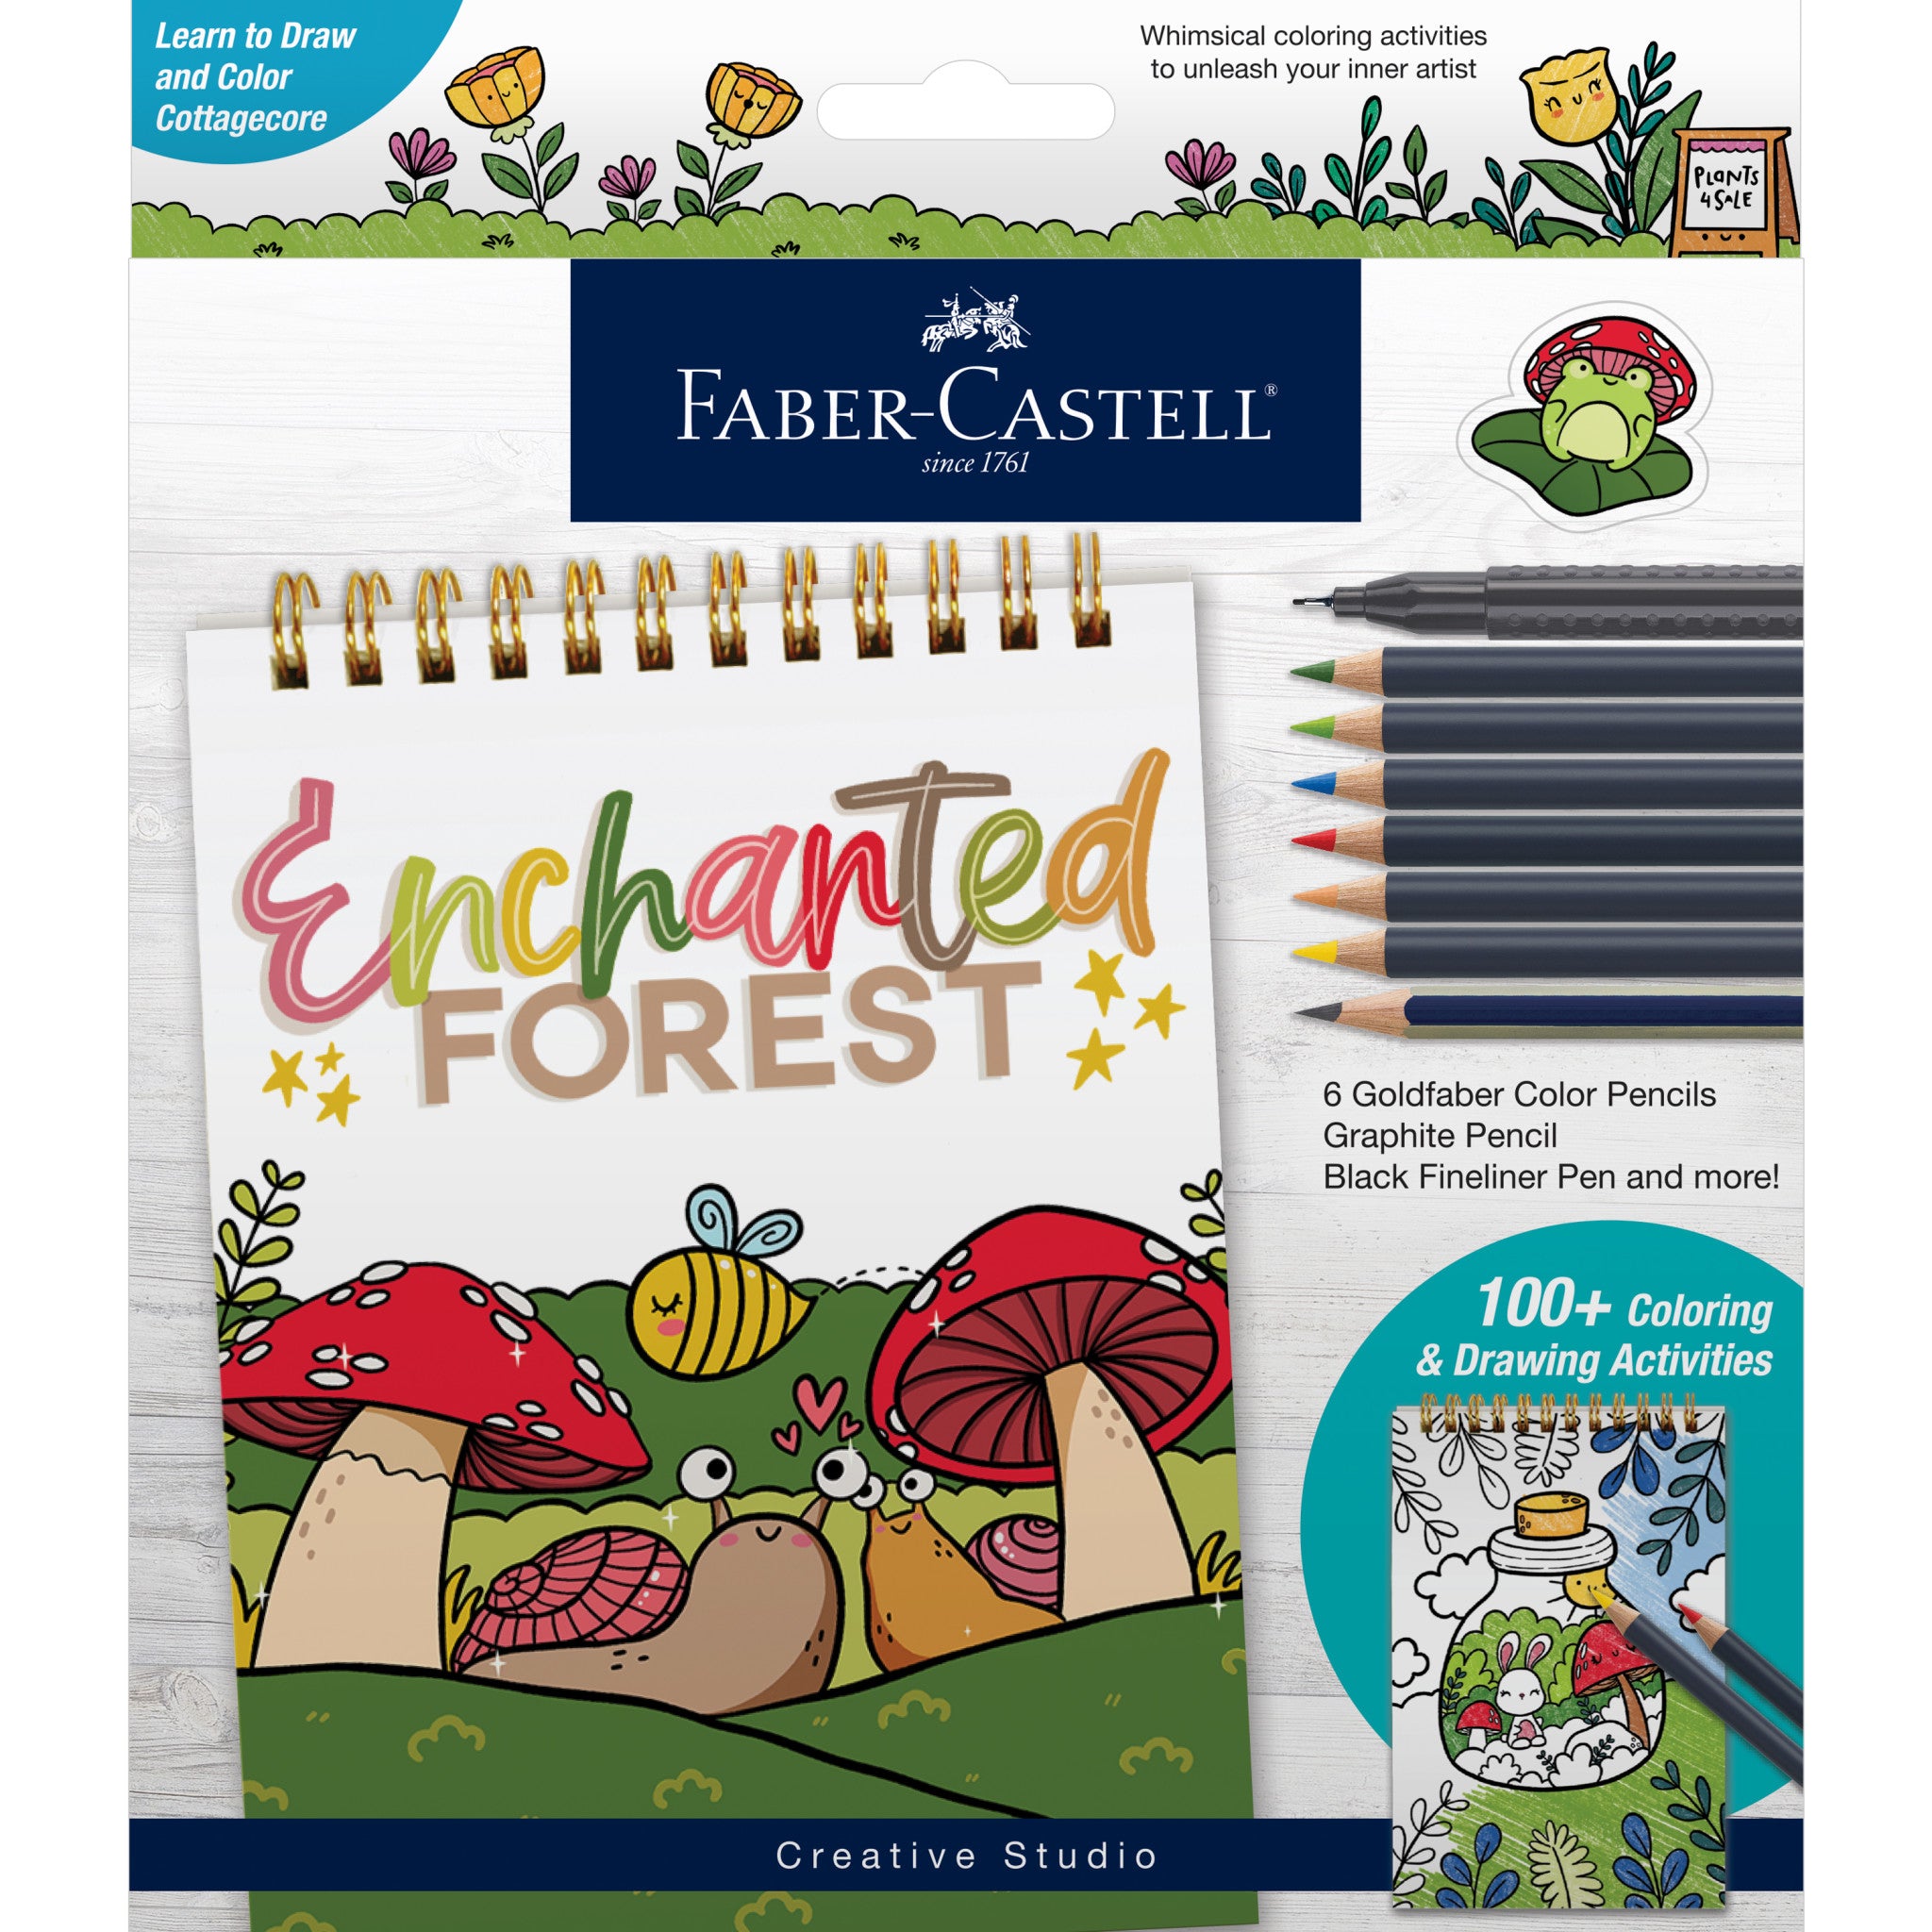 Gift Kit: 5 Stress Relieving Adult Coloring Books with Pencils